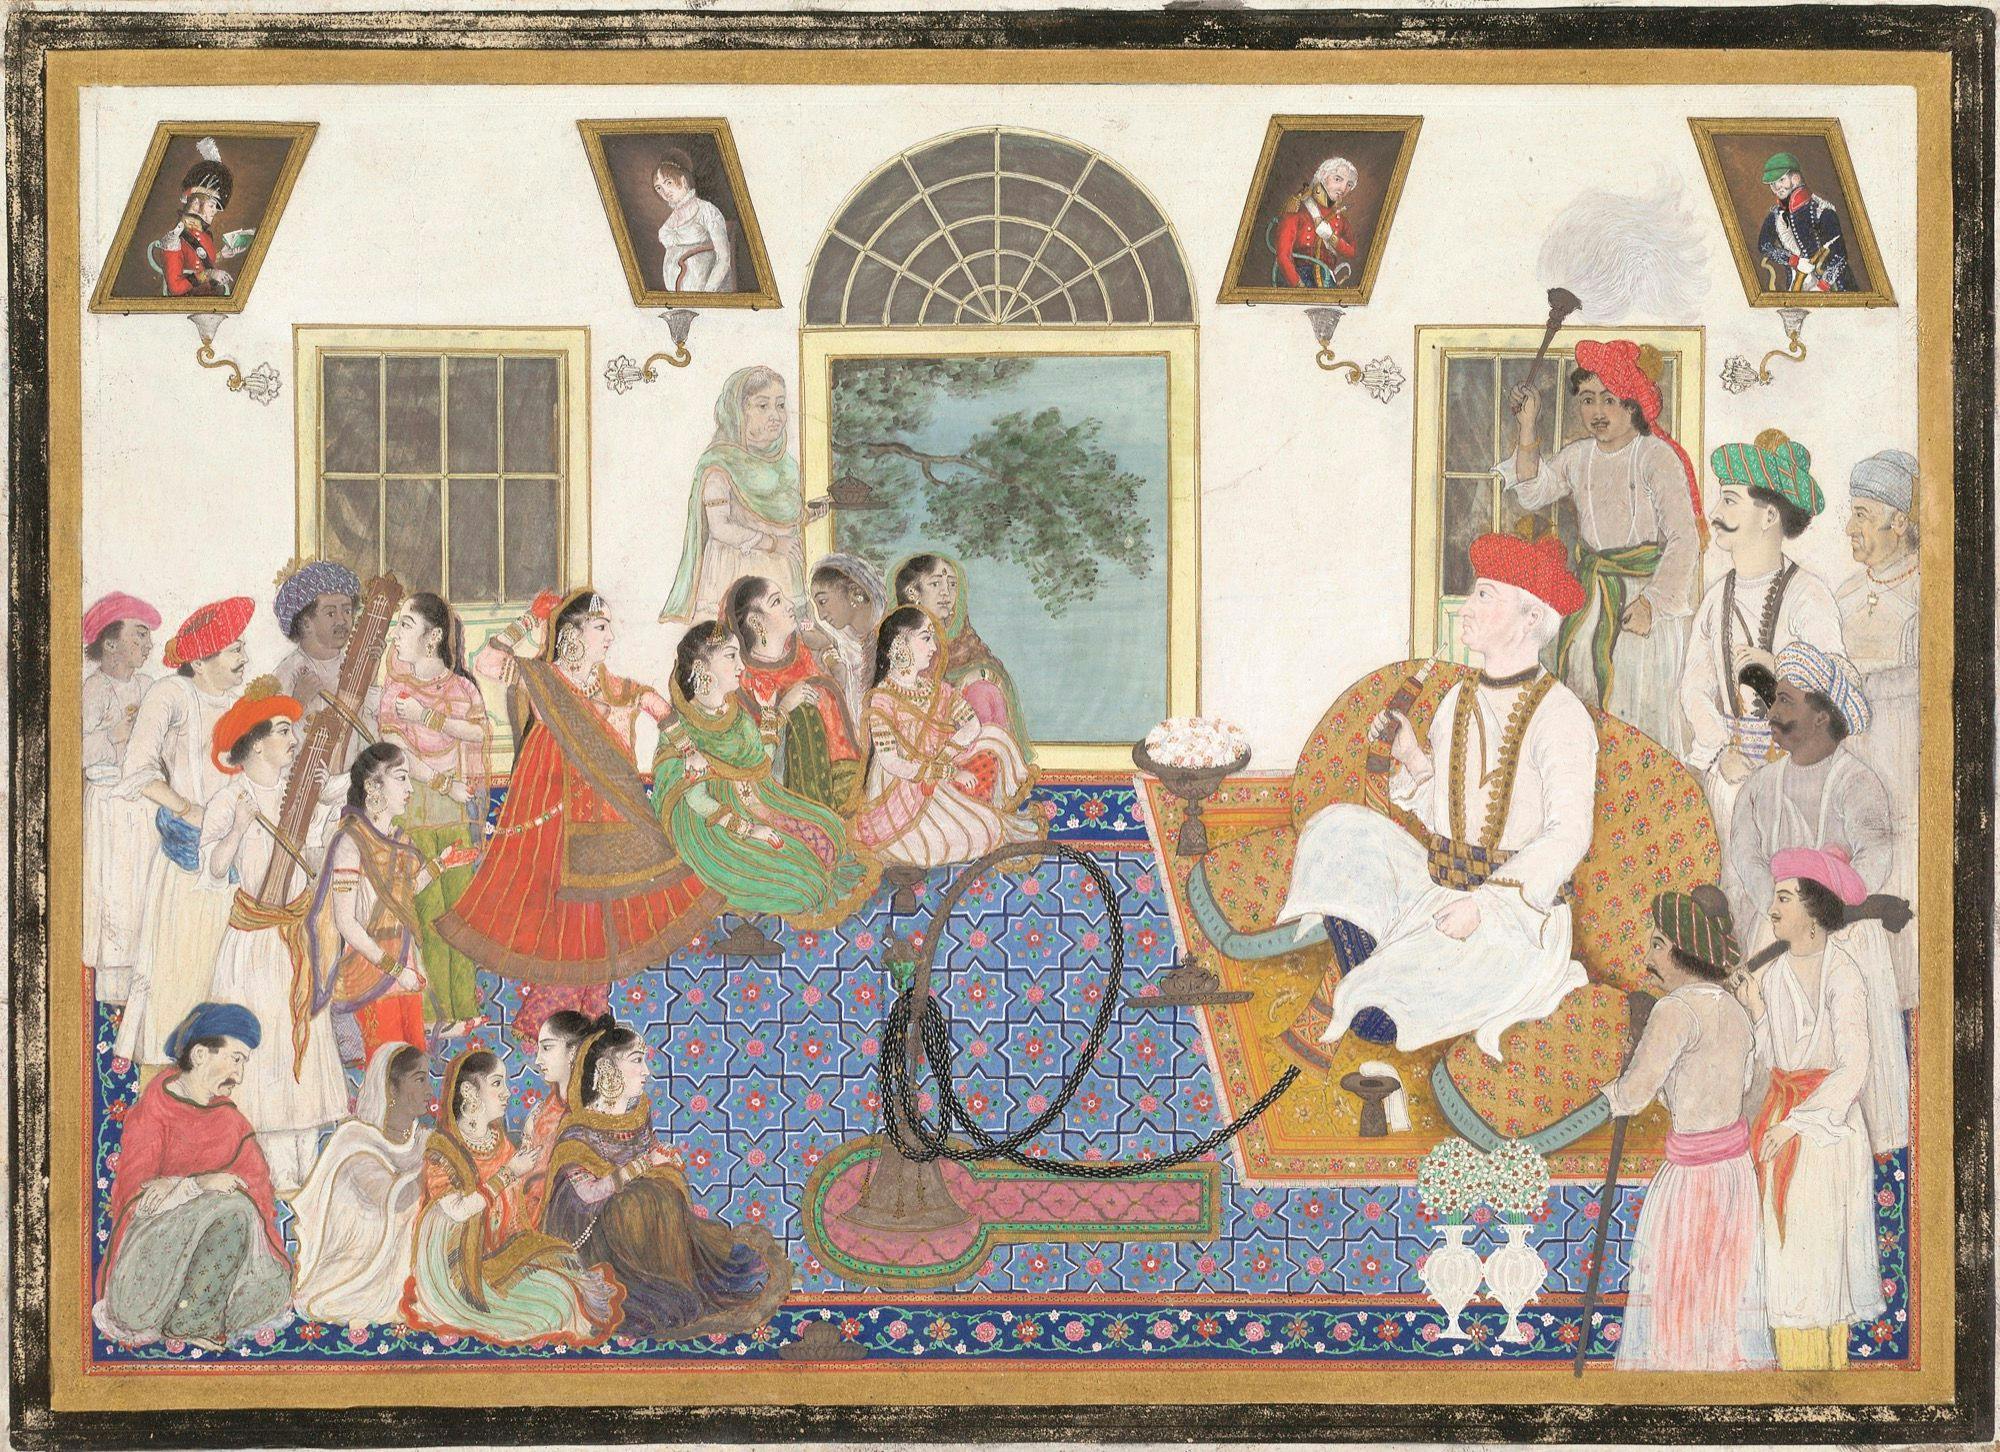 Sir David Ochterlony, British Resident to the Mughal court watching a nautch in his house in Delhi (c. 1820)